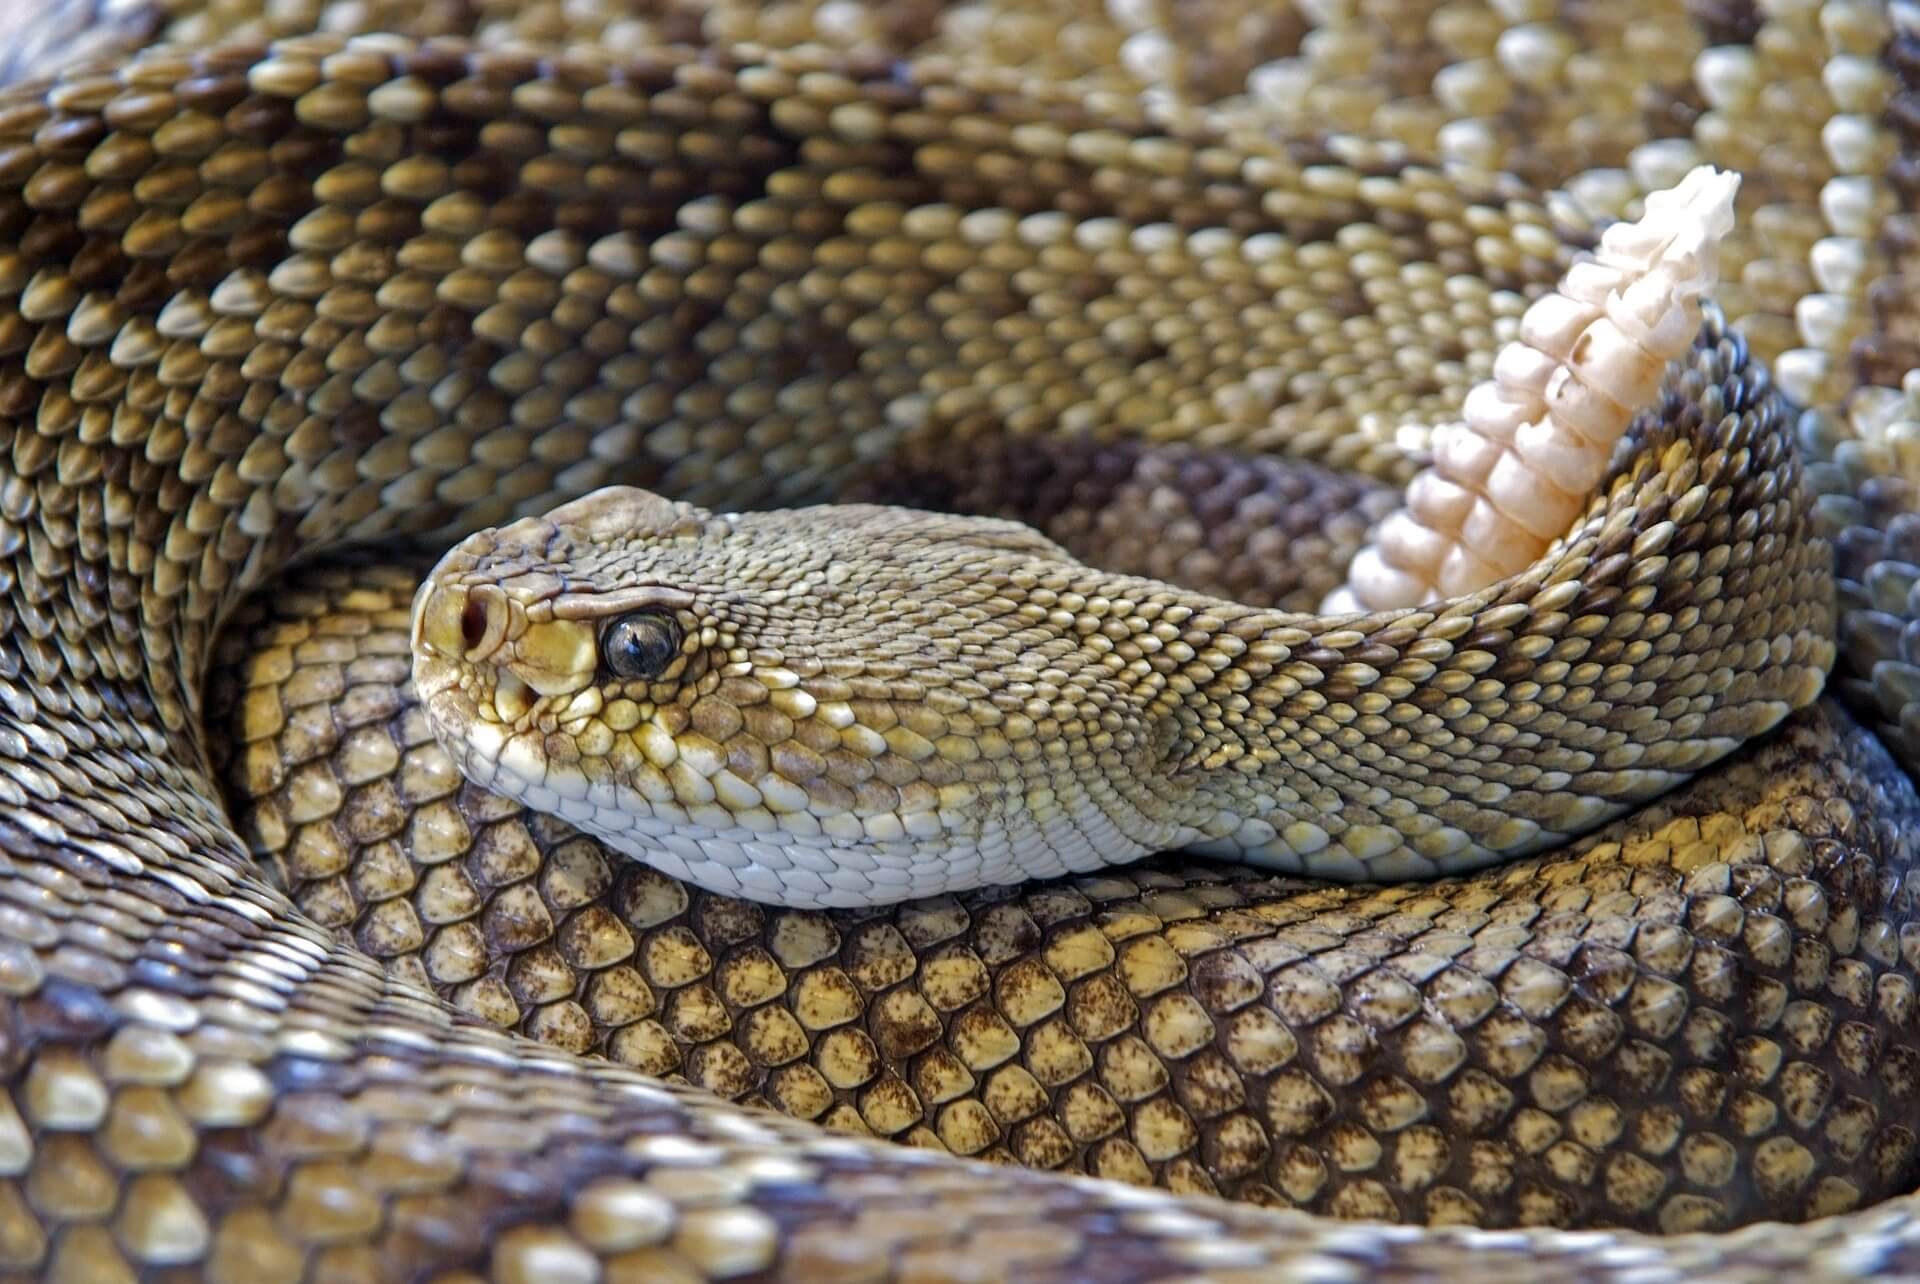 World Record Snake Dies After Just Three Days in Captivity